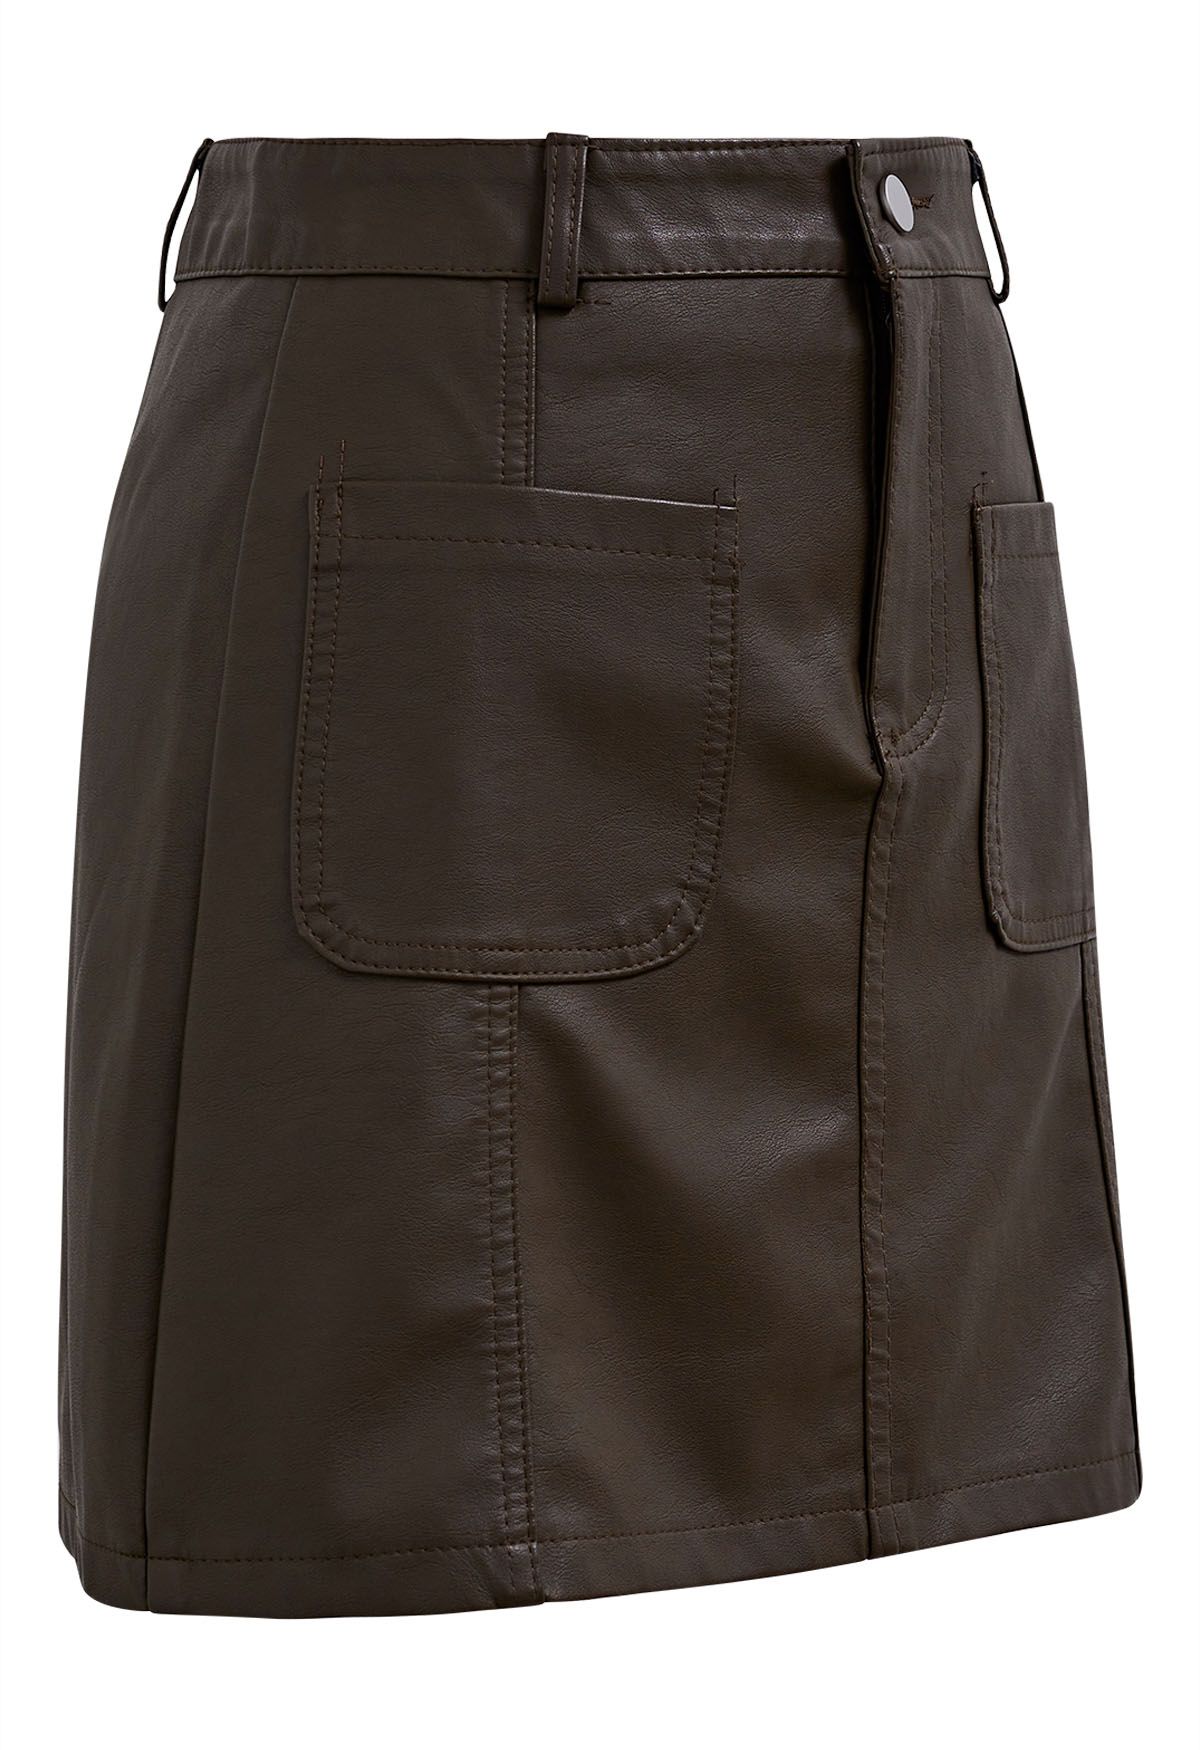 Patch Pocket Faux Leather Mini Skirt in Brown